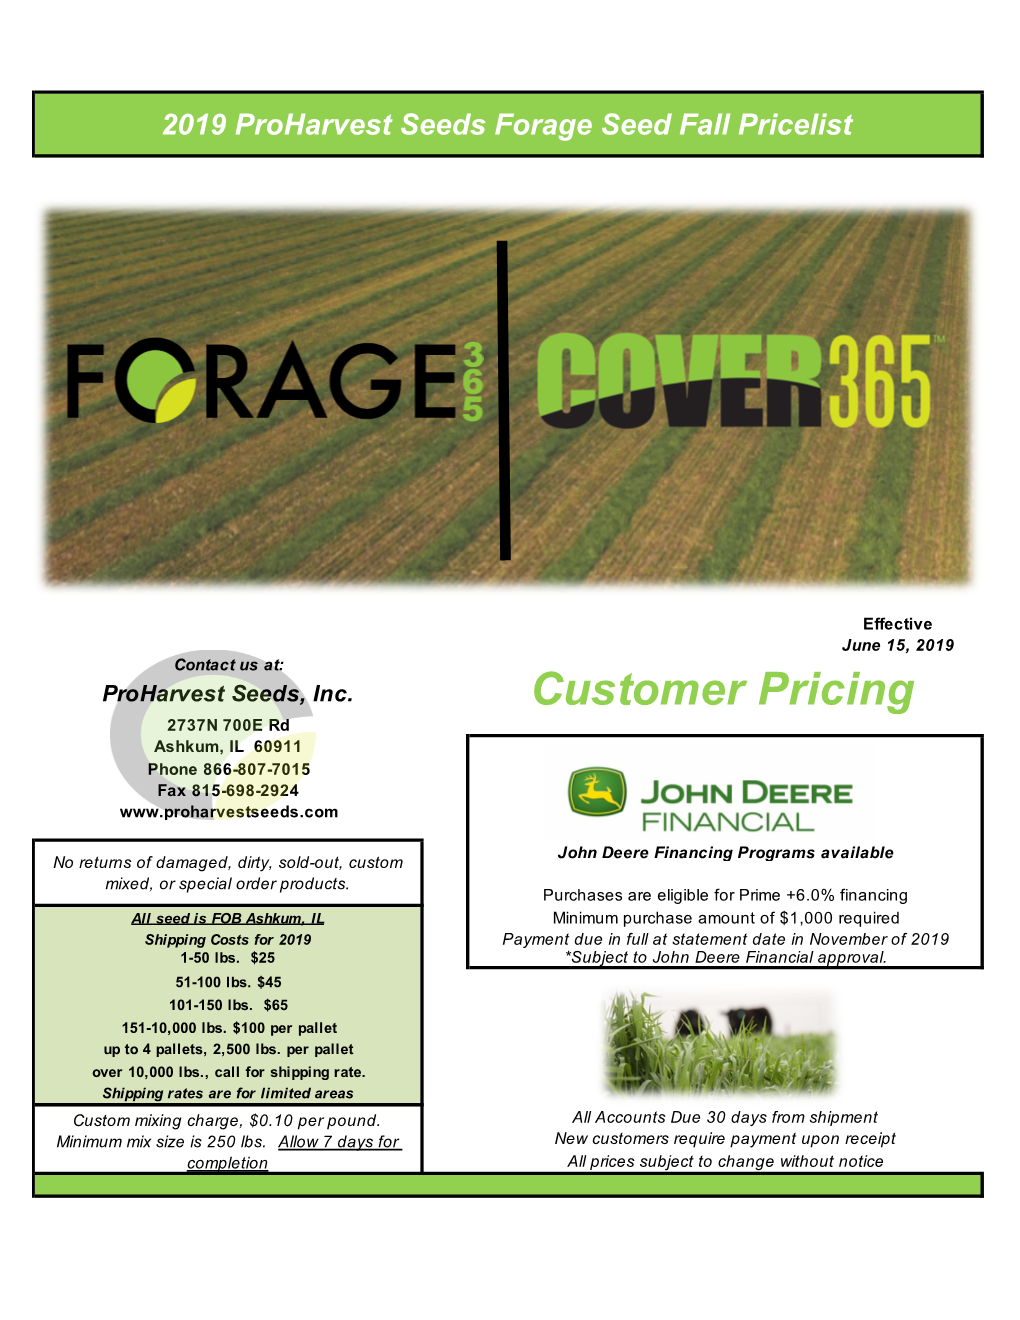 2019 Fall Forage Price Master Do Not Share